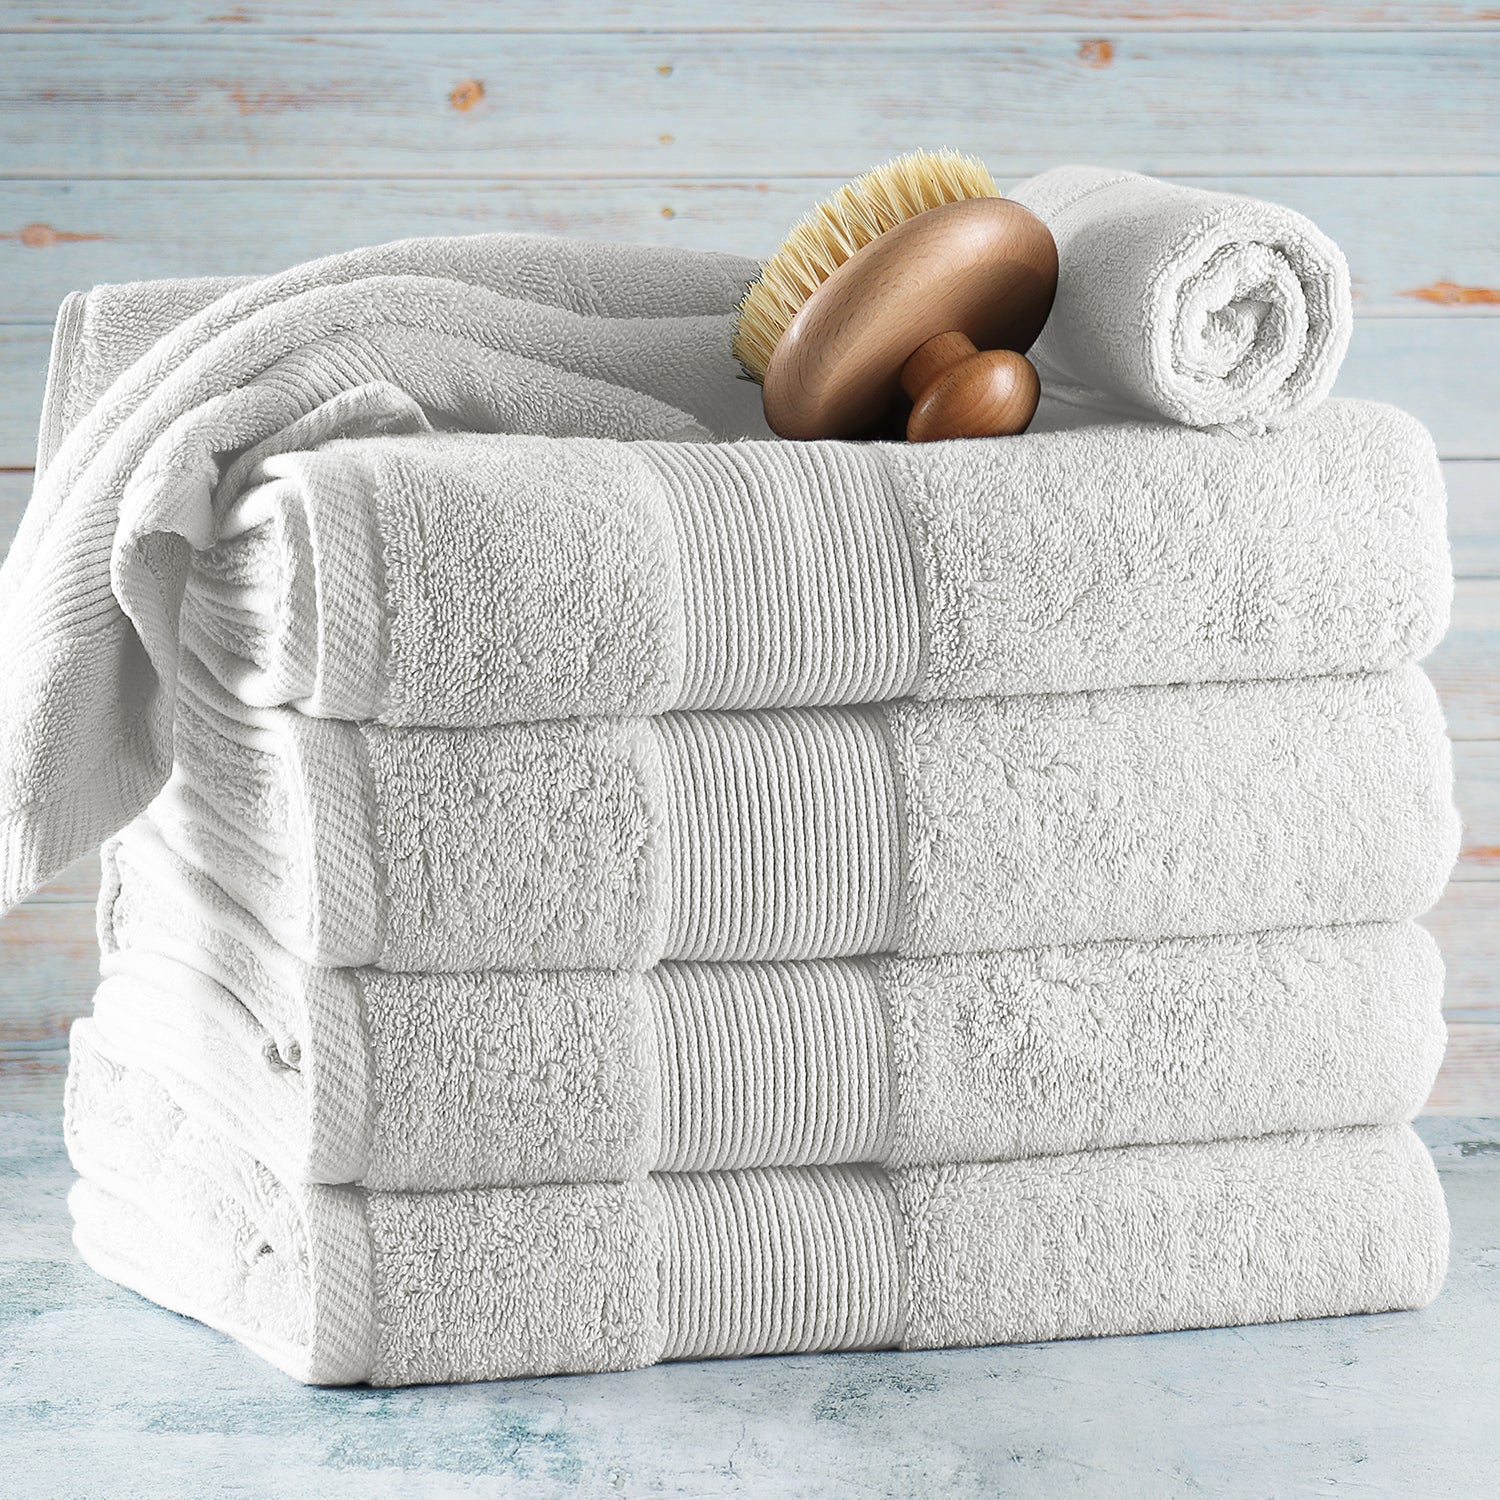 Premium Bath Towels Set - [Pack of 8] 100% Cotton Highly Absorbent 2 B